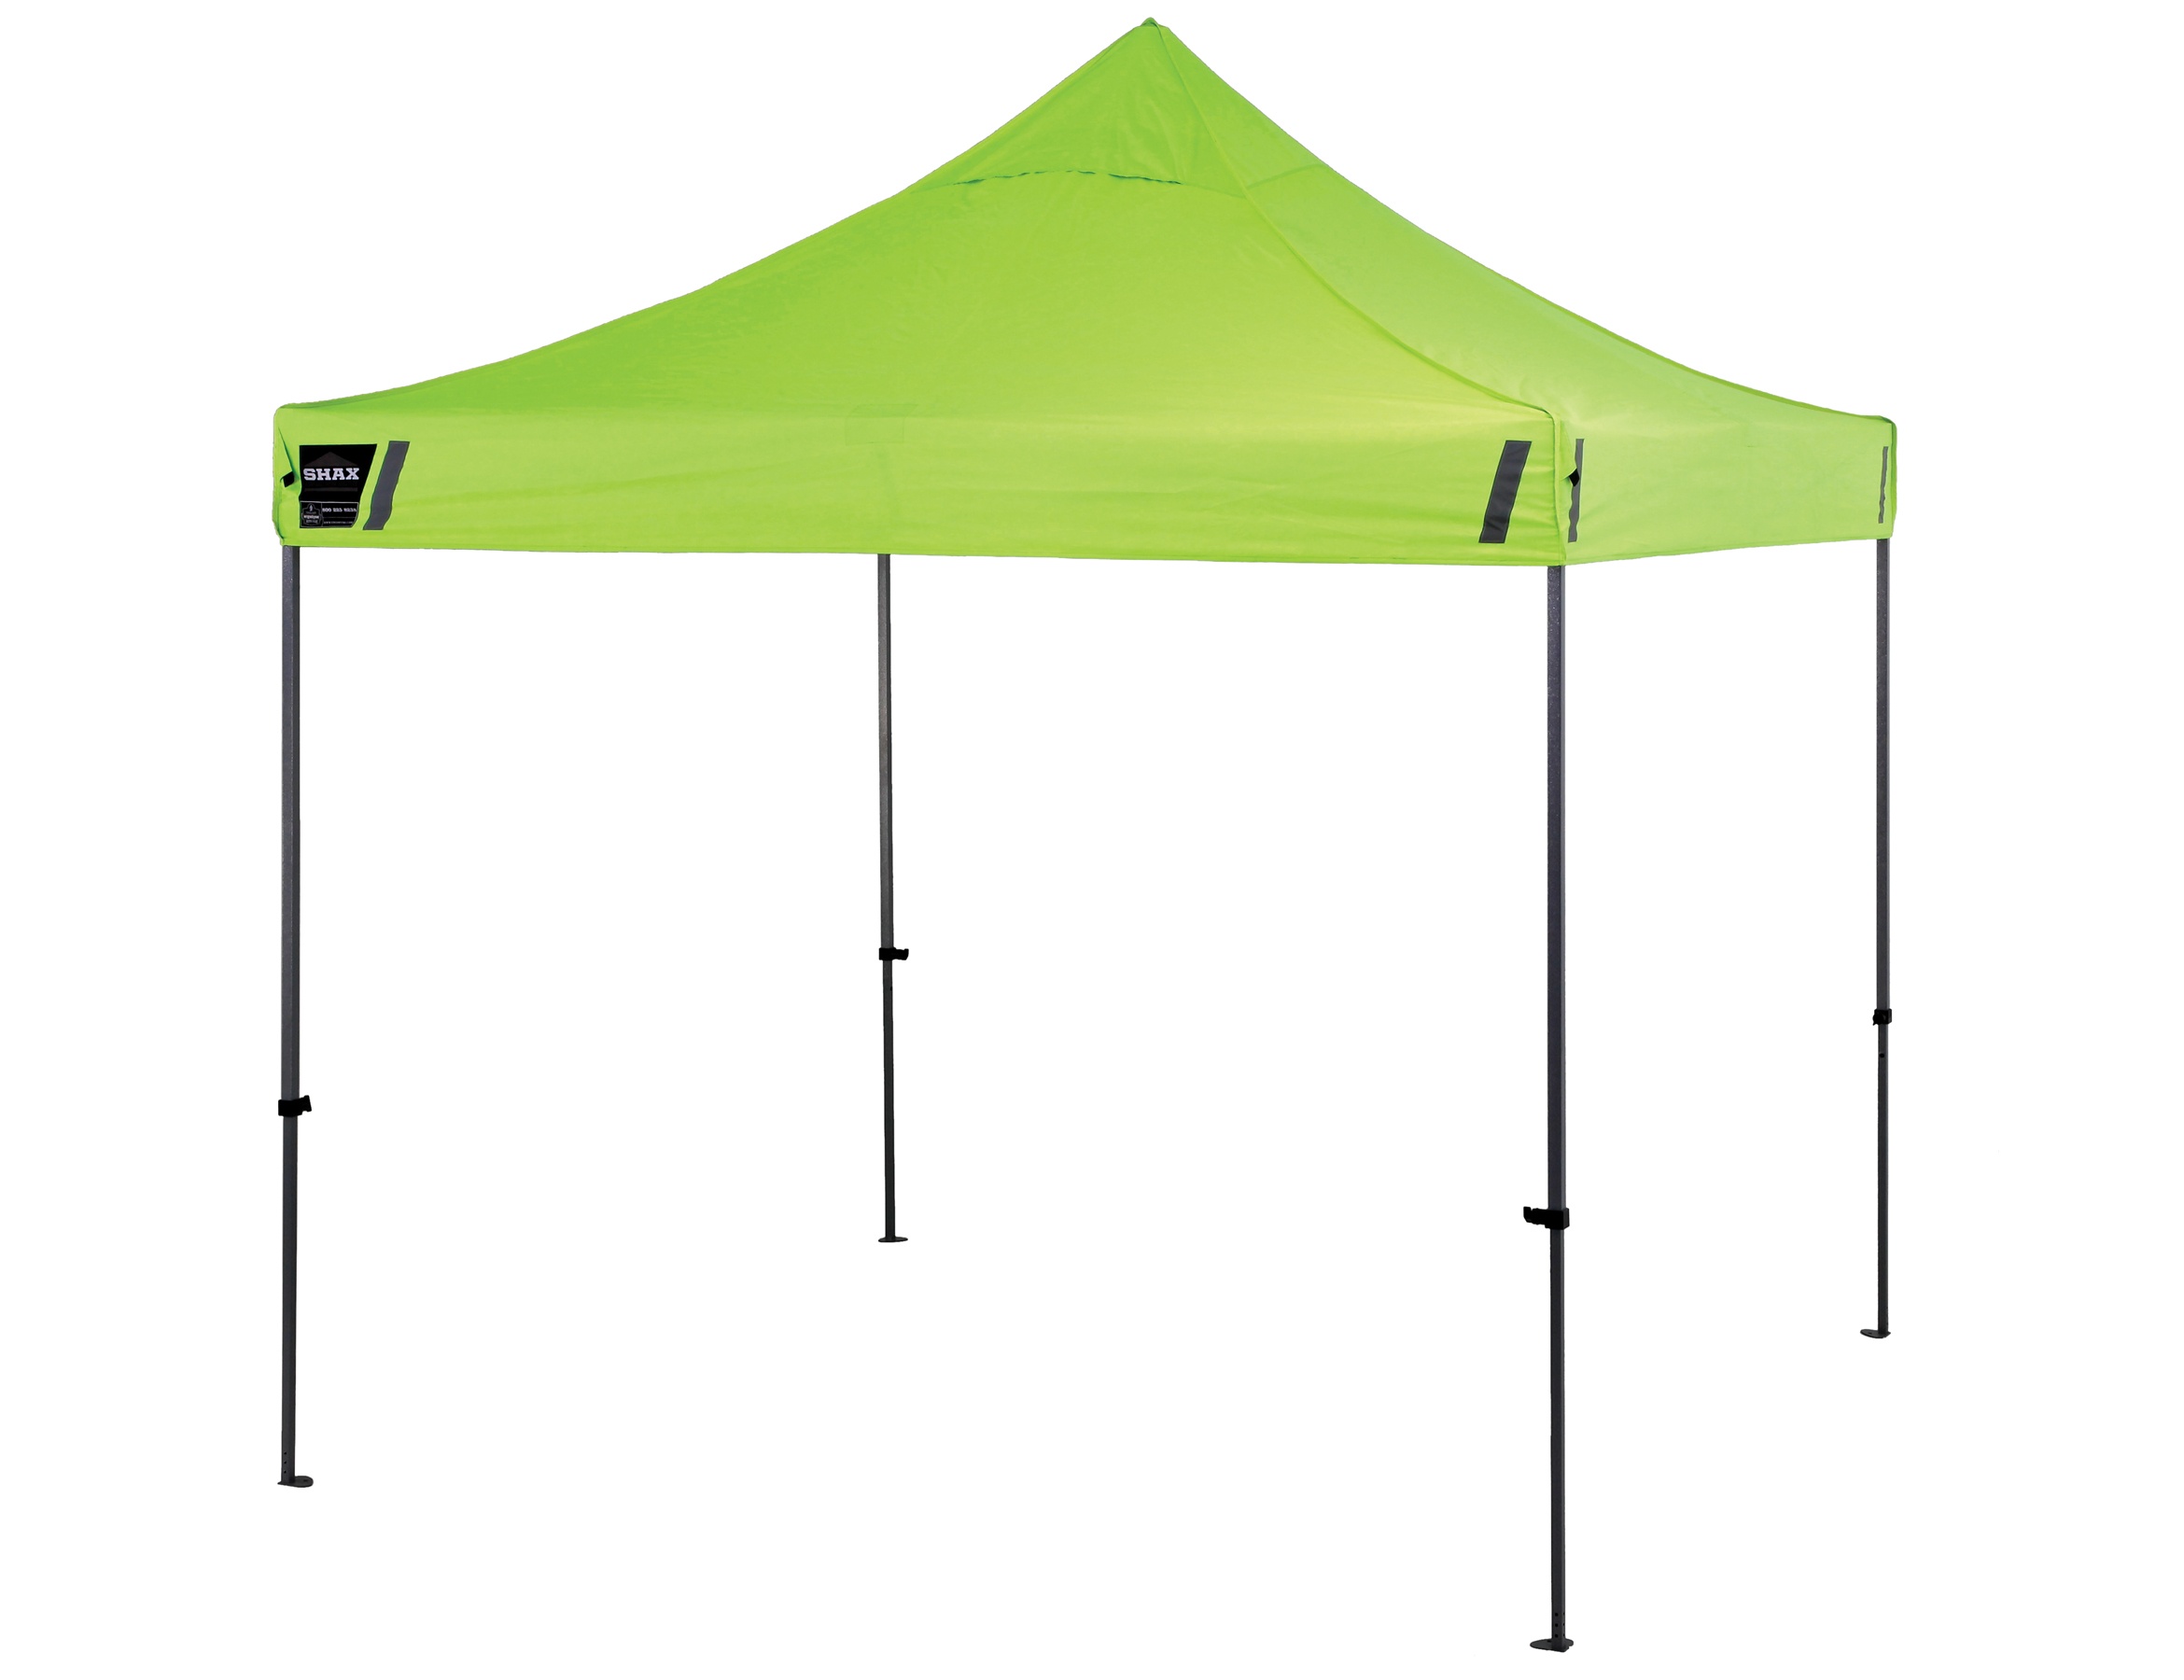 Ergodyne 6000 Shax Heavy-Duty Commercial Pop-Up Tent from Columbia Safety